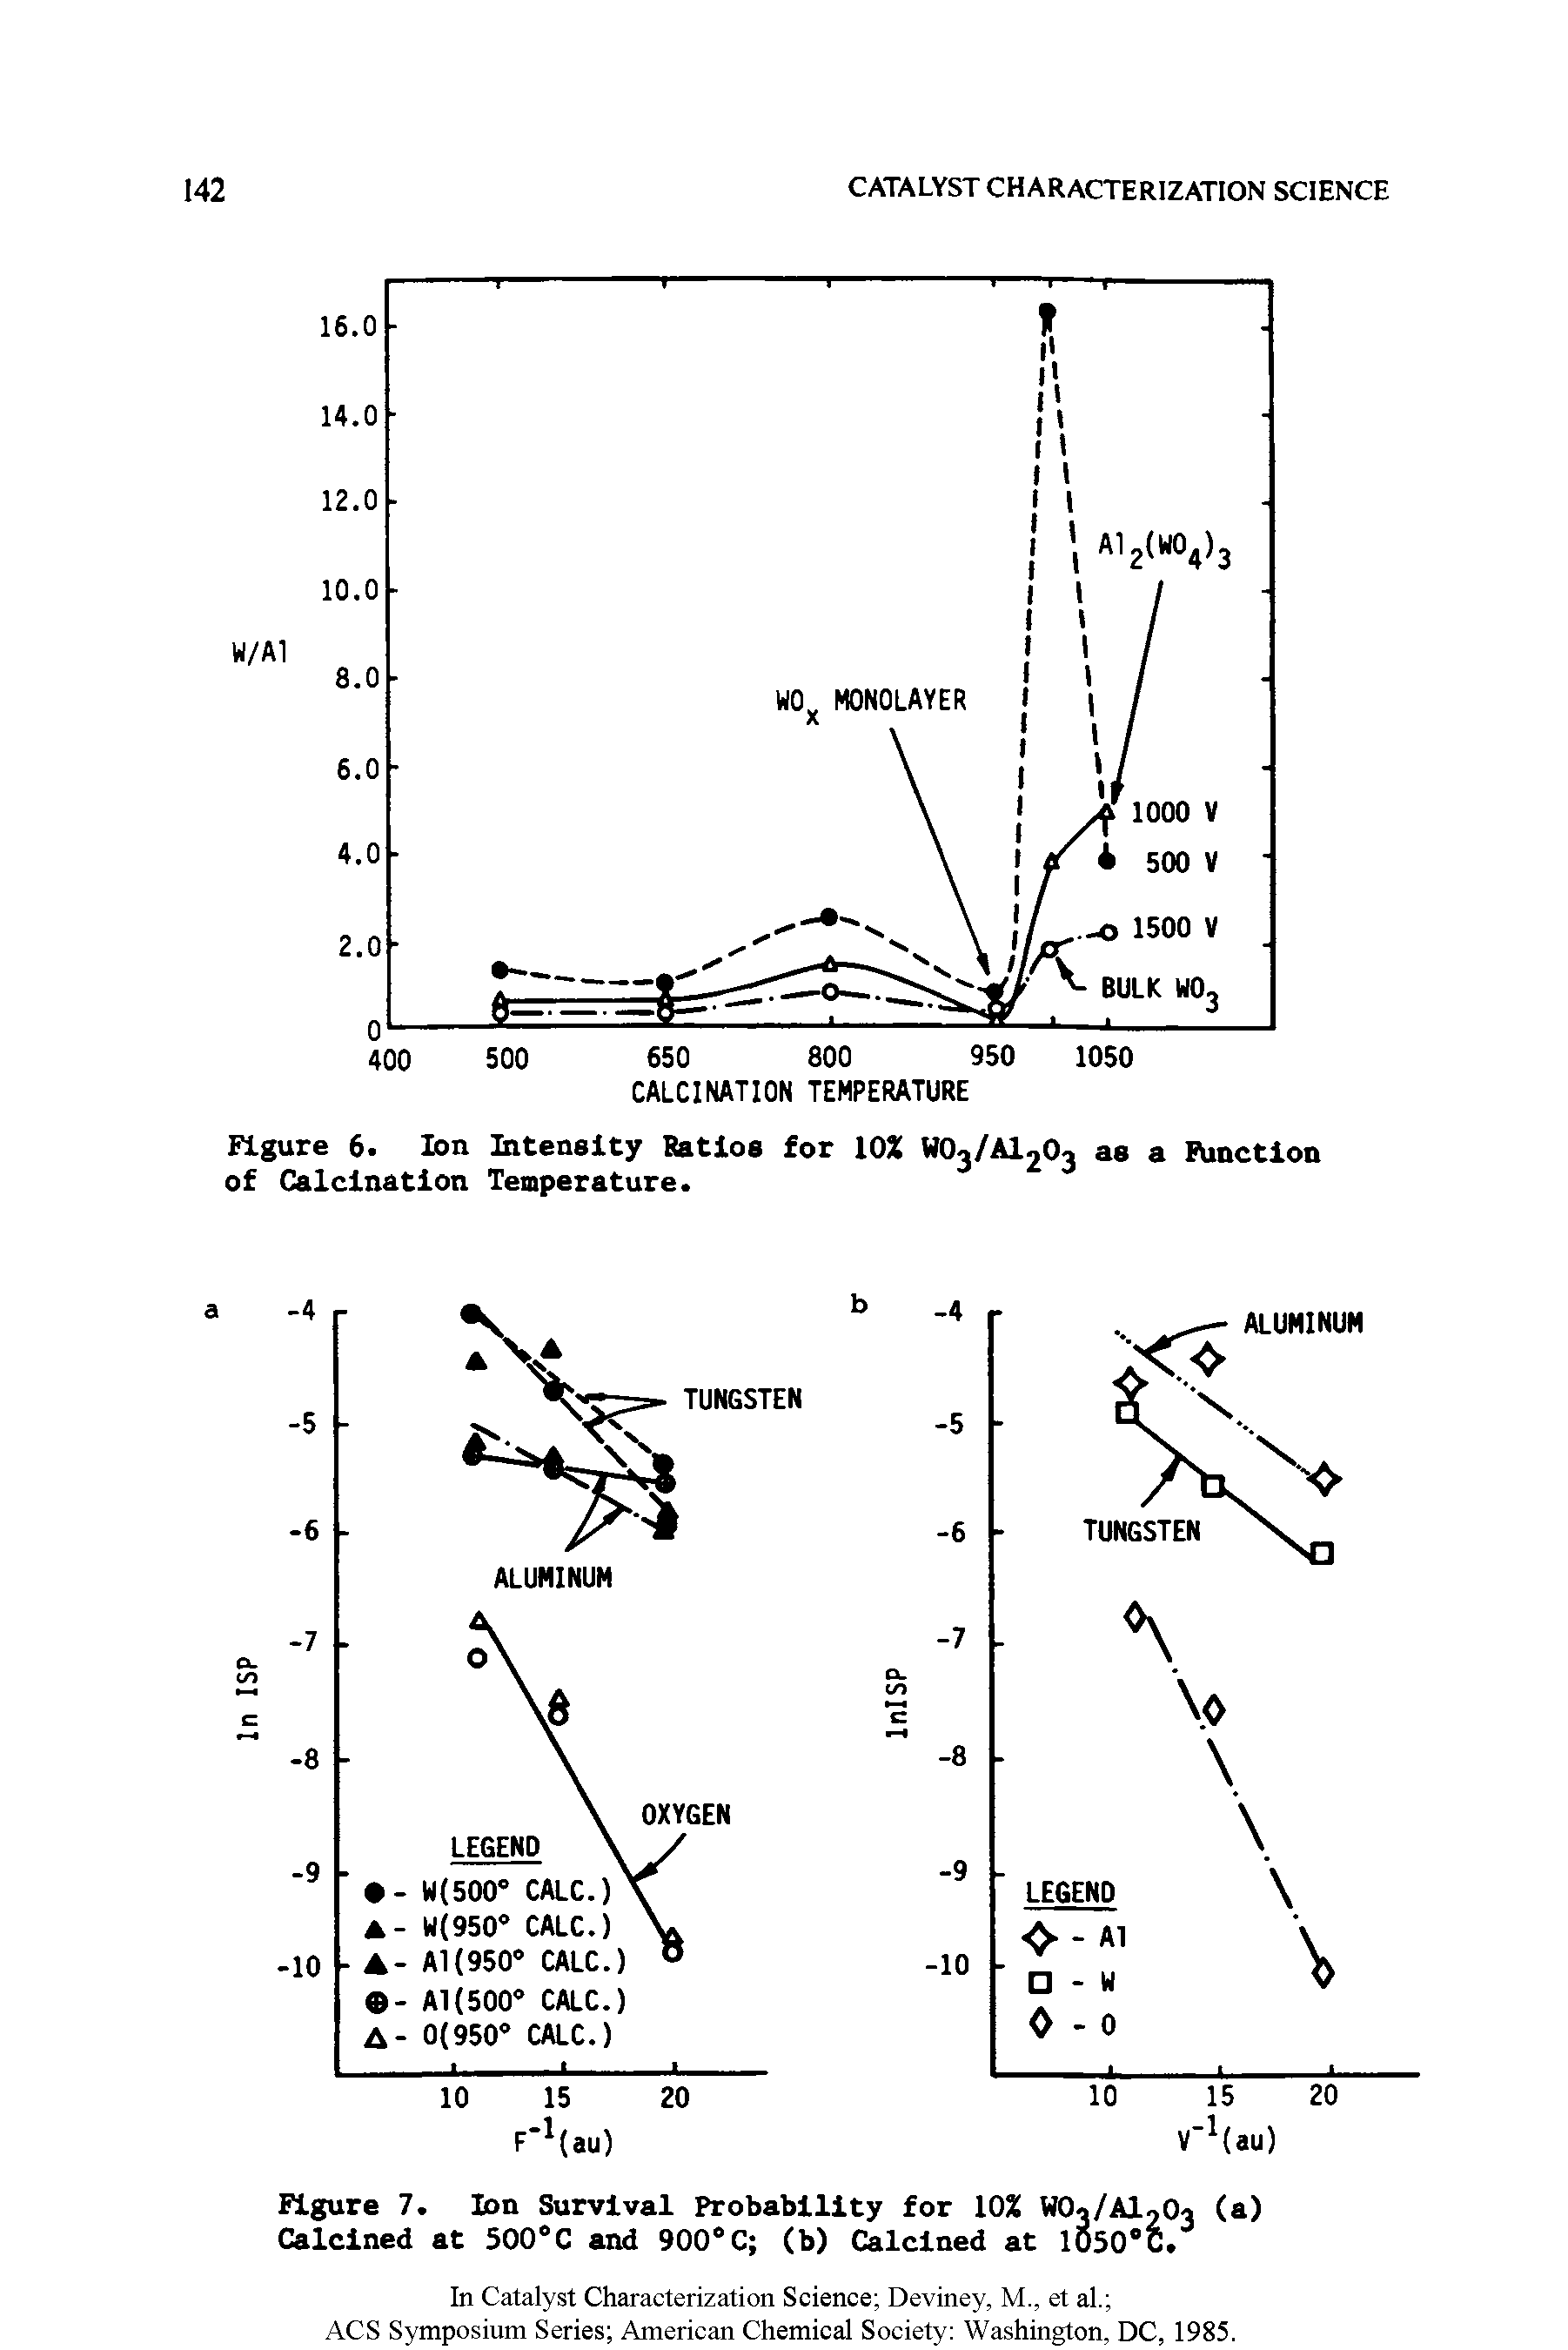 Figure 6. Ion Intensity Ratios for 10% WO3/AI2O3 as a Function of Calcination Temperature.